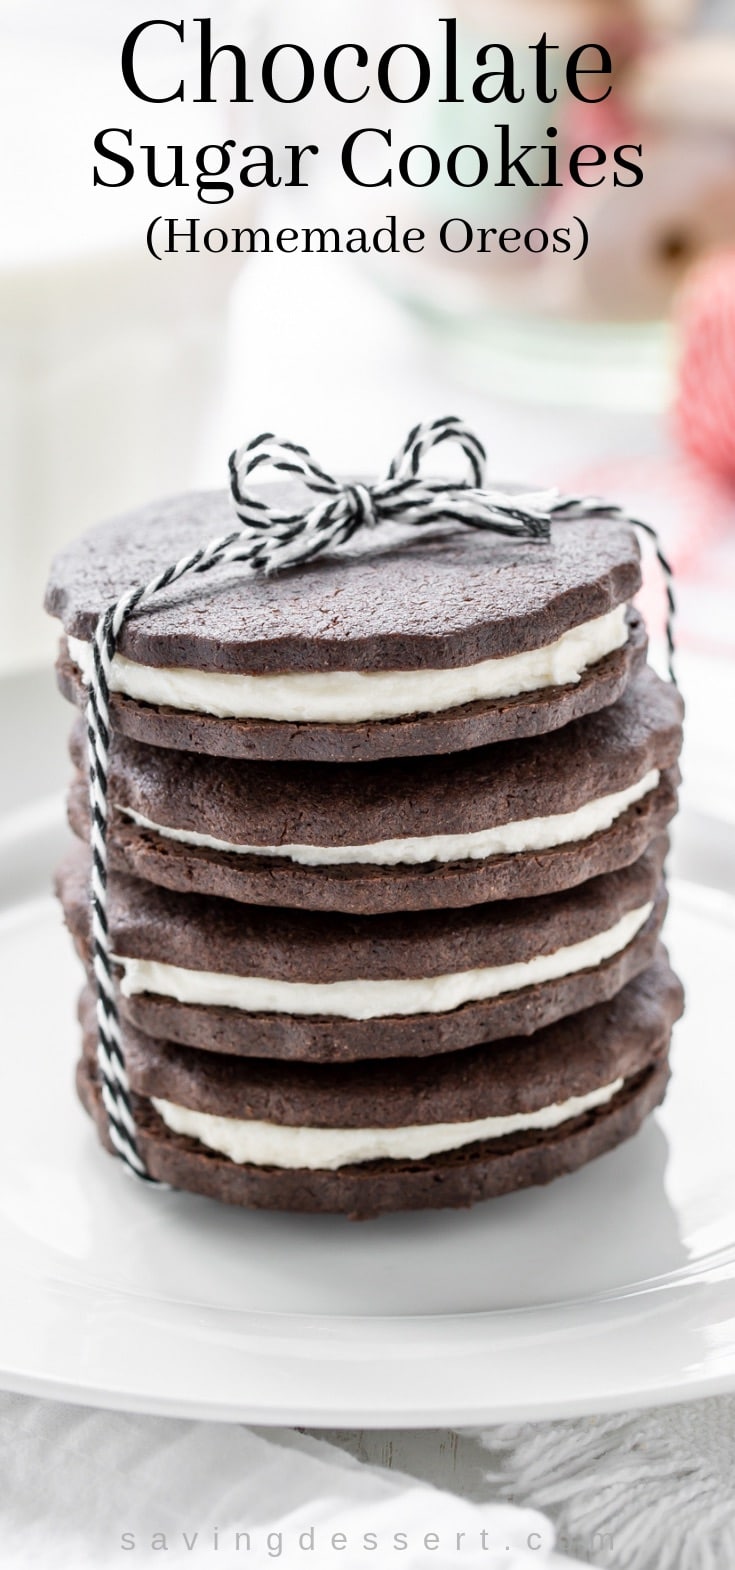 A stack of chocolate sugar cookies with a vanilla cream filing wrapped up with a black and white string